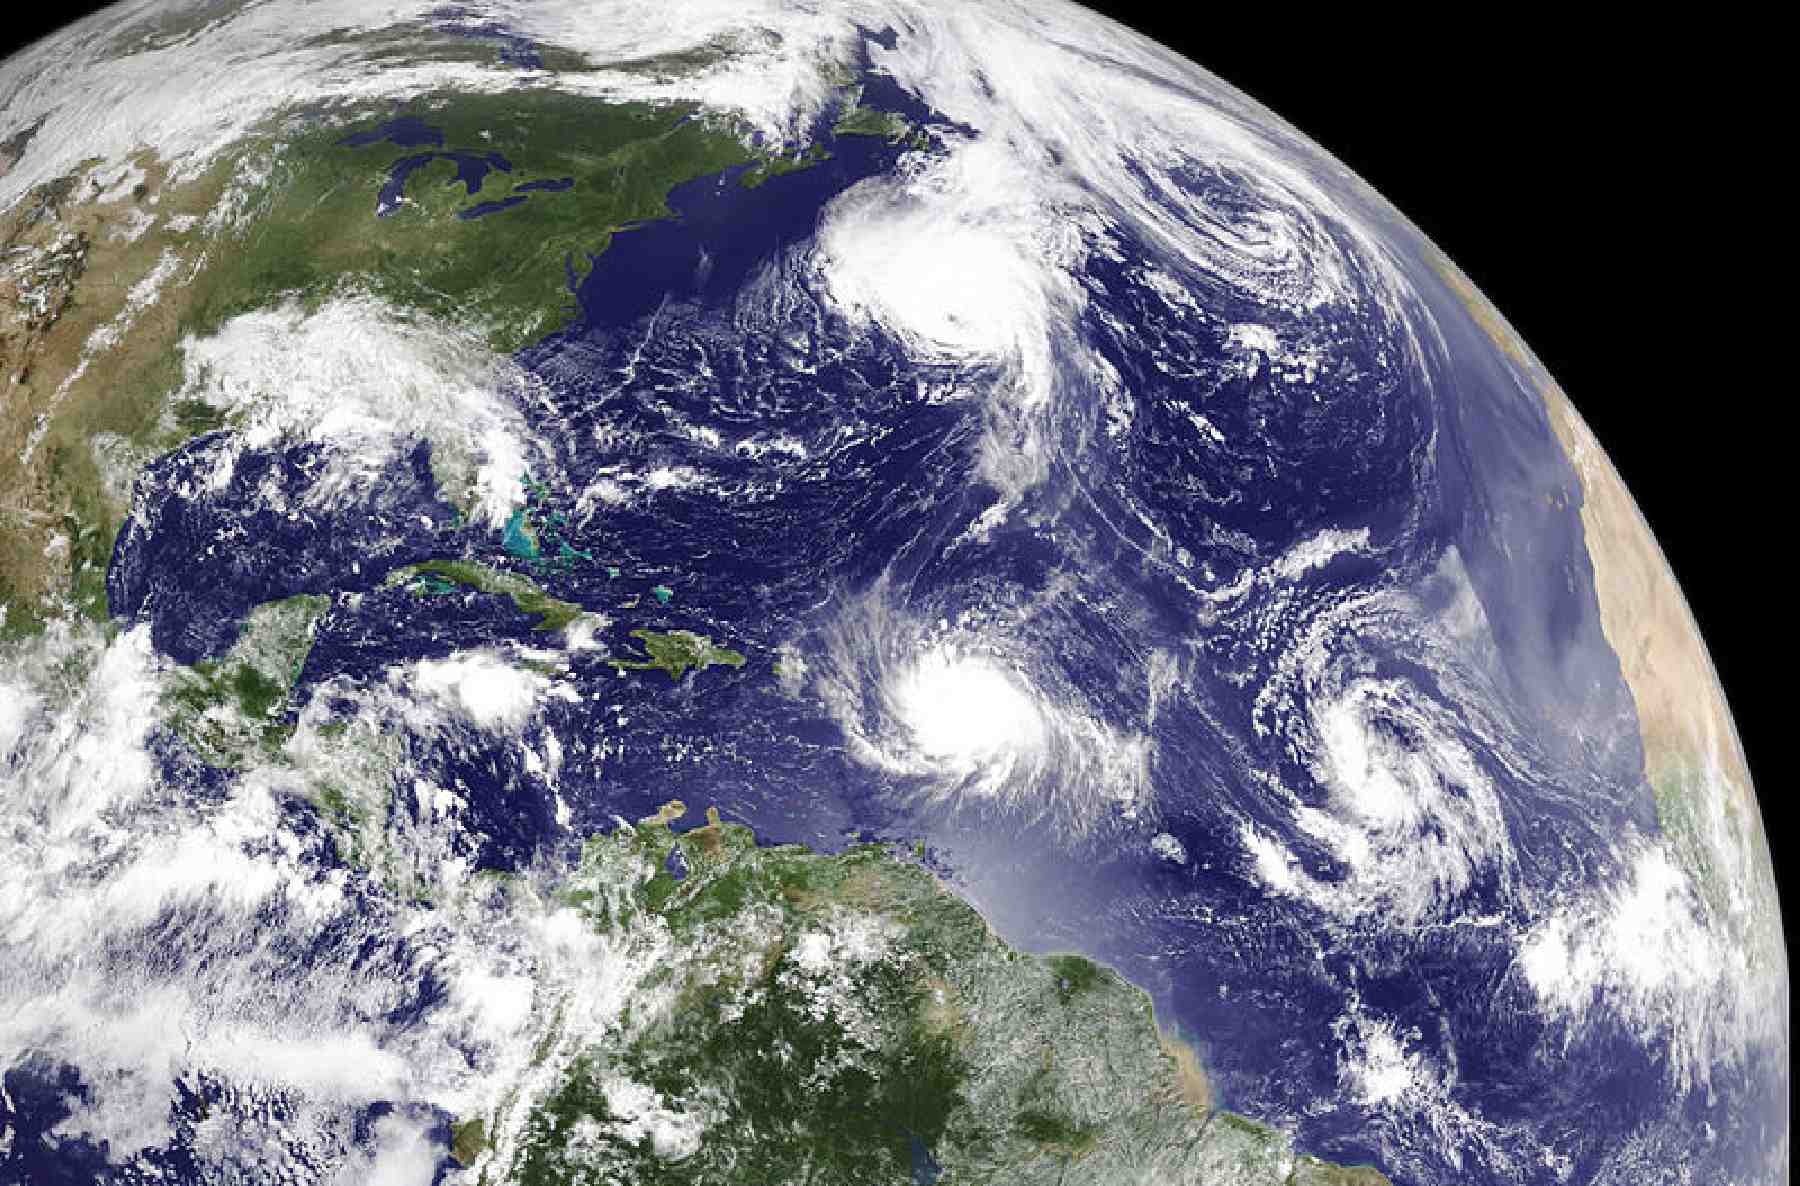 Figure 1. Synoptic satellite imagery of hurricane and tropical storm systems in the Atlantic Basin, 2010, showing hurricanes Earl (at center) and Fiona. (Source: NASA / NOAA, 2010)